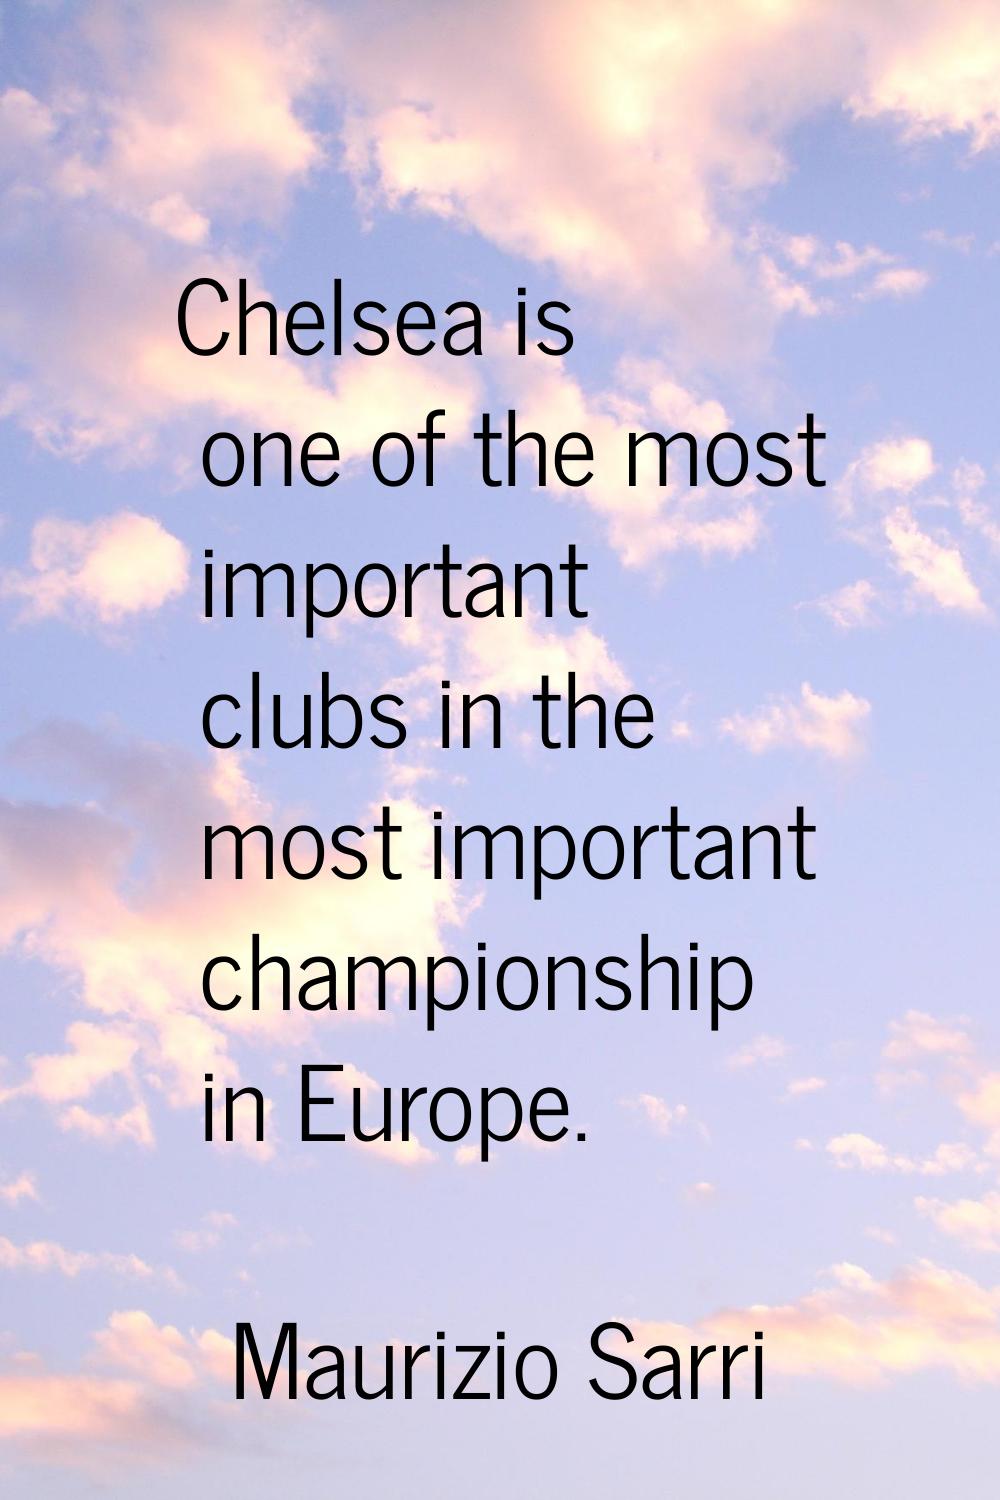 Chelsea is one of the most important clubs in the most important championship in Europe.